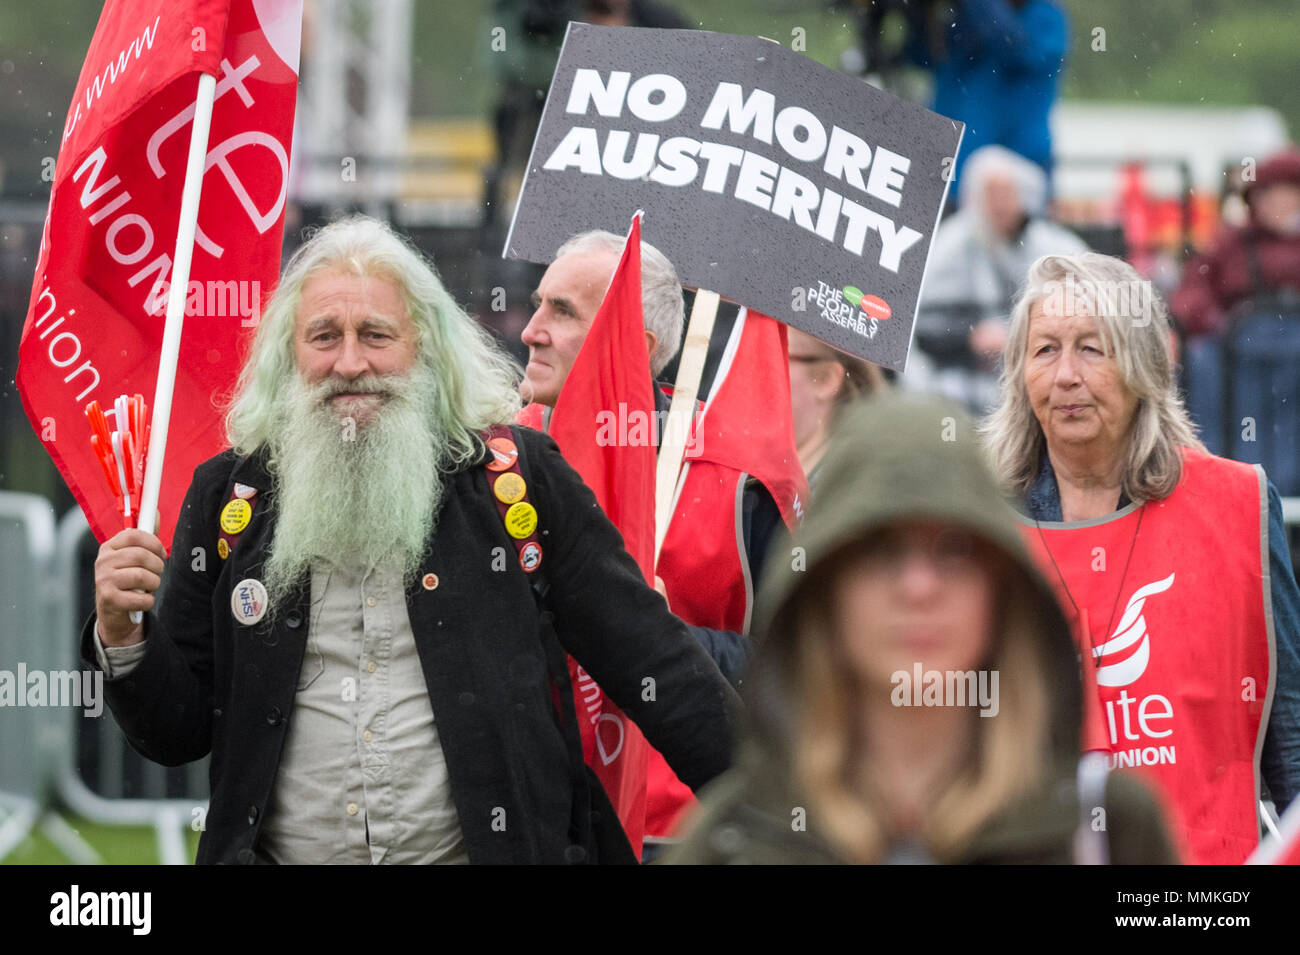 London, UK. 12th May, 2018. Despite the heavy rain, thousands turn up to hear the Labour Party leader, Jeremy Corbyn, address trade unionists during a TUC rally in Hyde Park on the theme of ‘a new deal for working people', aimed against government austerity and injustice. Credit: Guy Corbishley/Alamy Live News Stock Photo